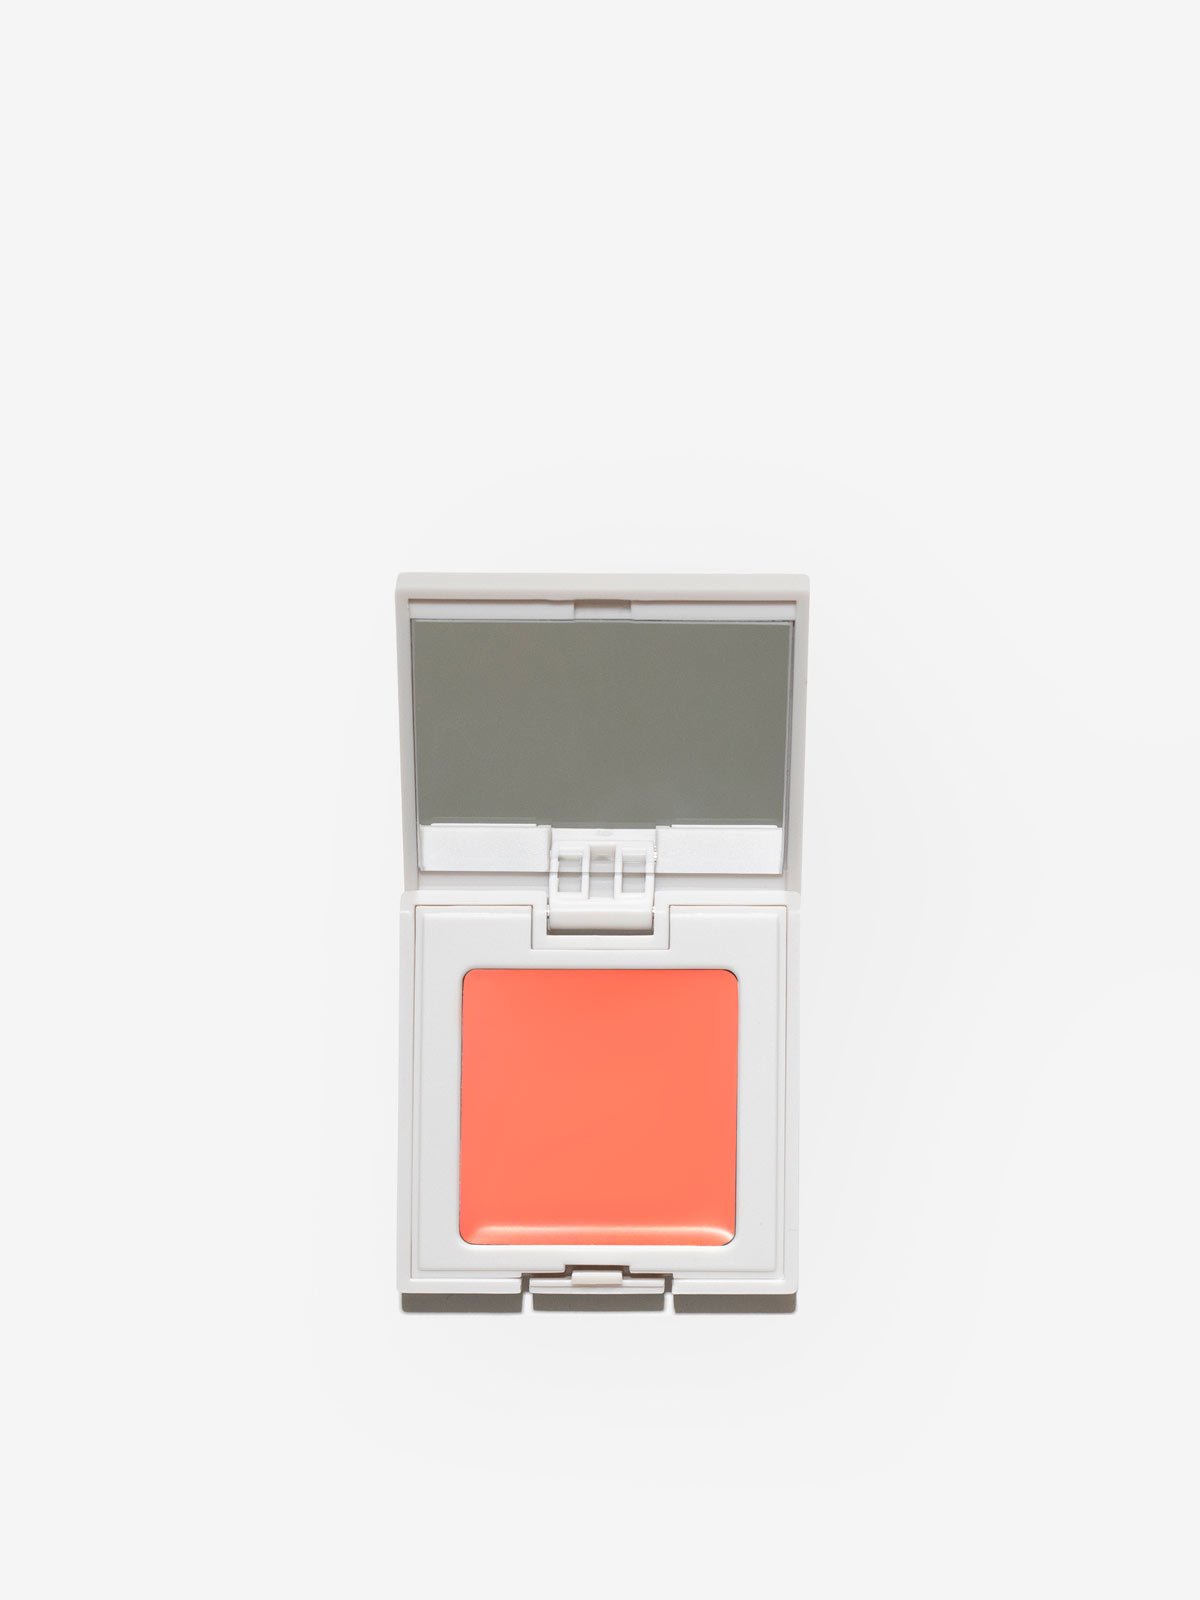 FRONT IMAGE OF REFY CREAM BLUSH IN SHADE PEACH. MIX OF PINK AND ORANGE WITH WARM UNDERTONES